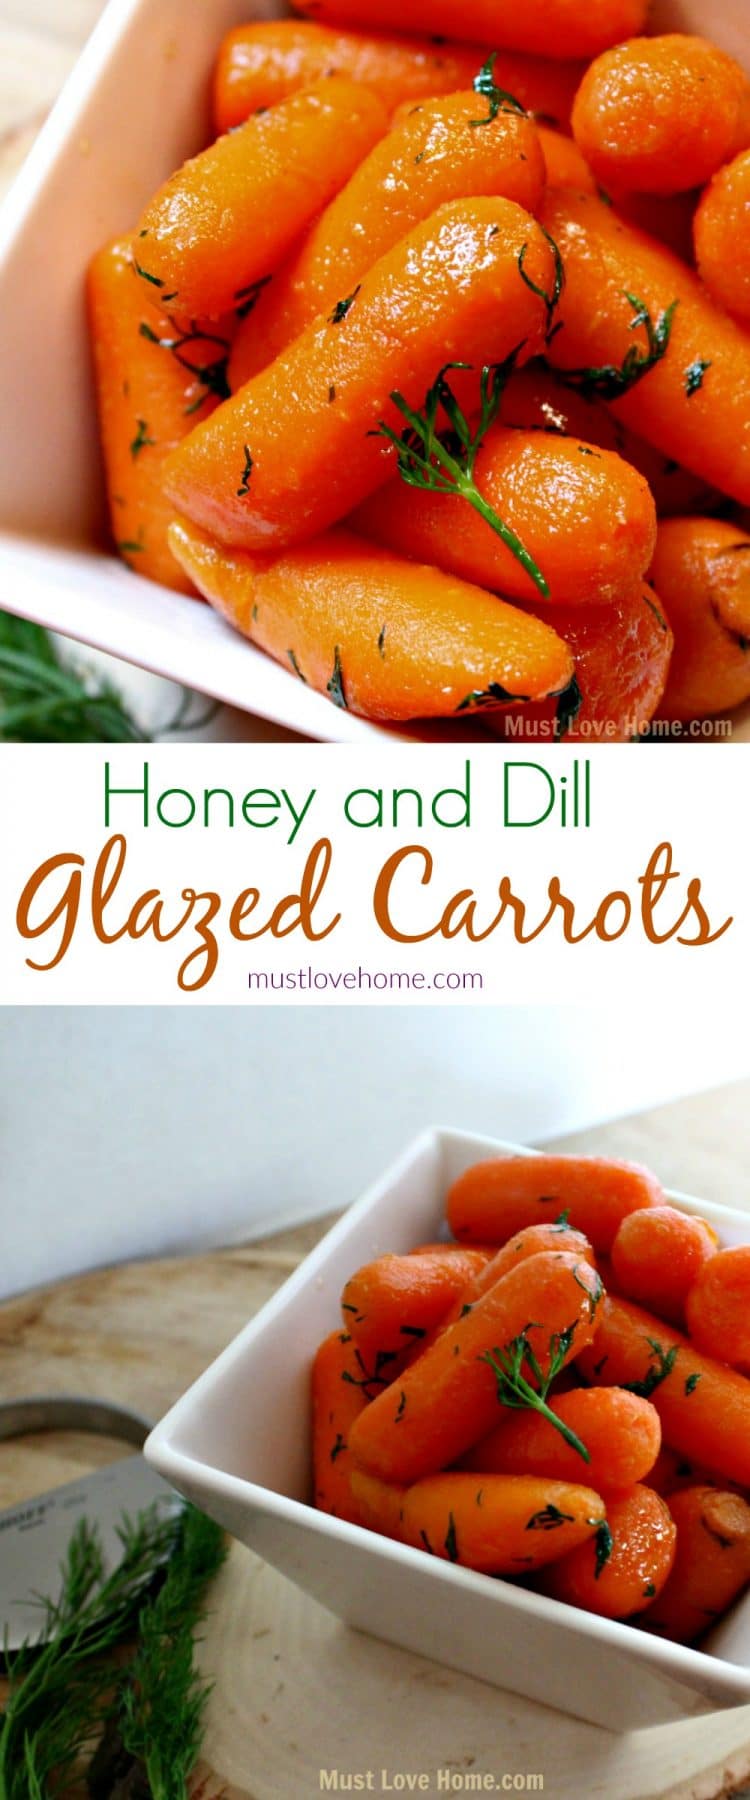 Honey Dill Glazed Carrots - a sweet and savory dish that will be sure to have everyone eating their vegetables - and ready in minutes!